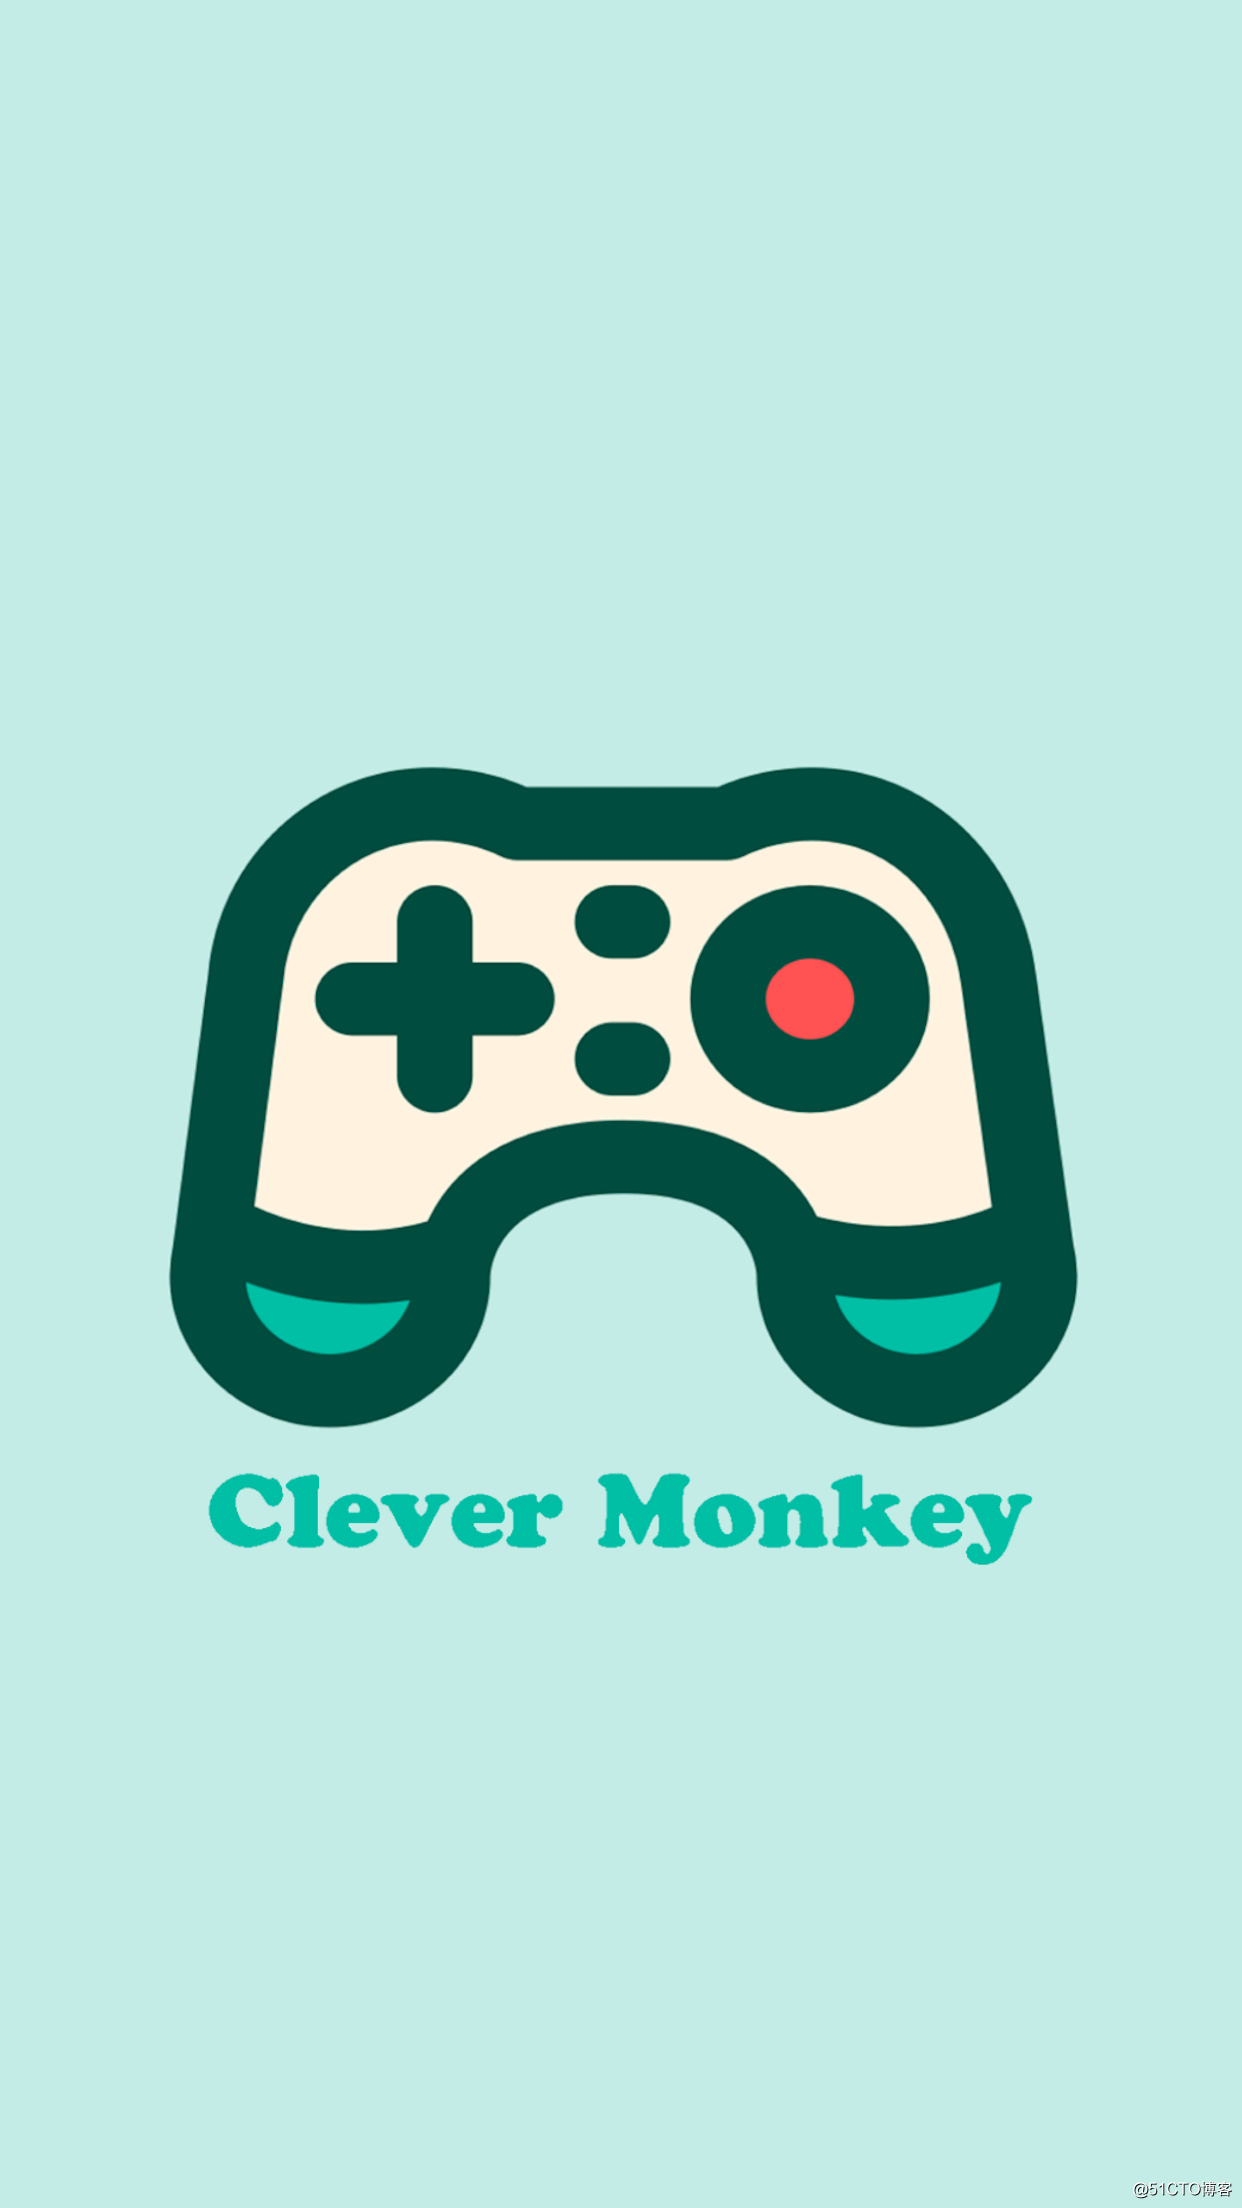 Clever Monkey - Fun Game